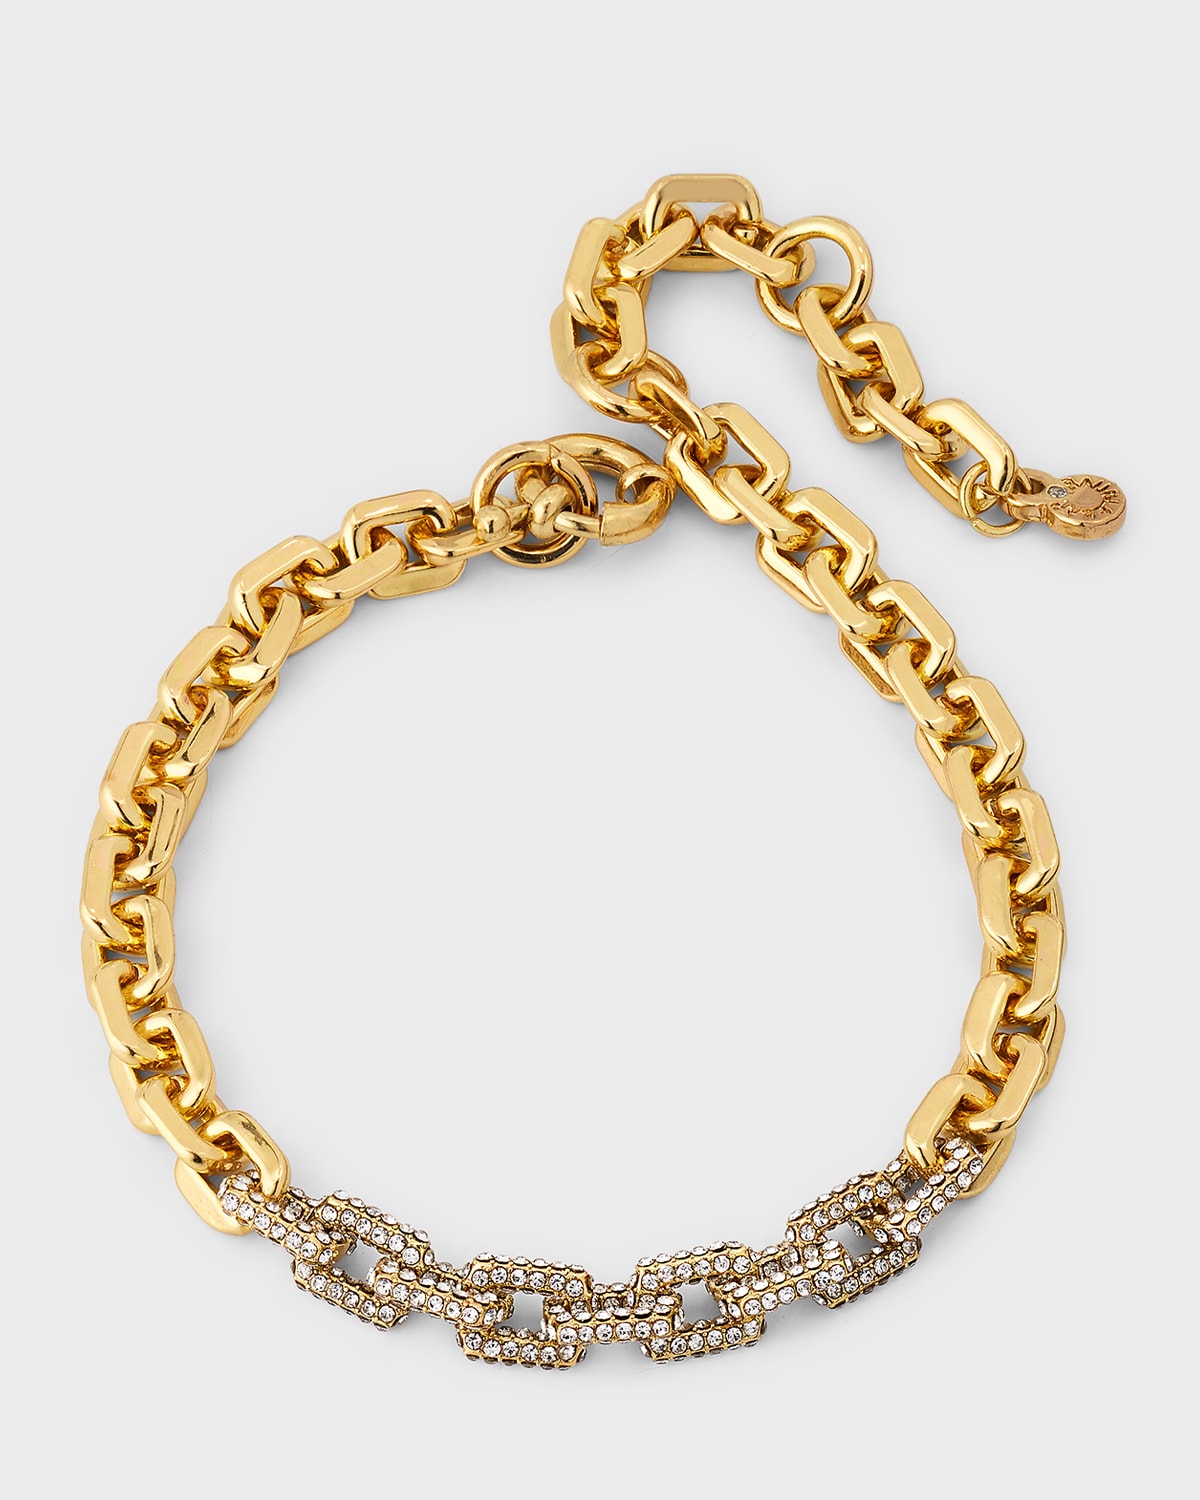 BaubleBar Lucy Chainlink Bracelet with Crystals